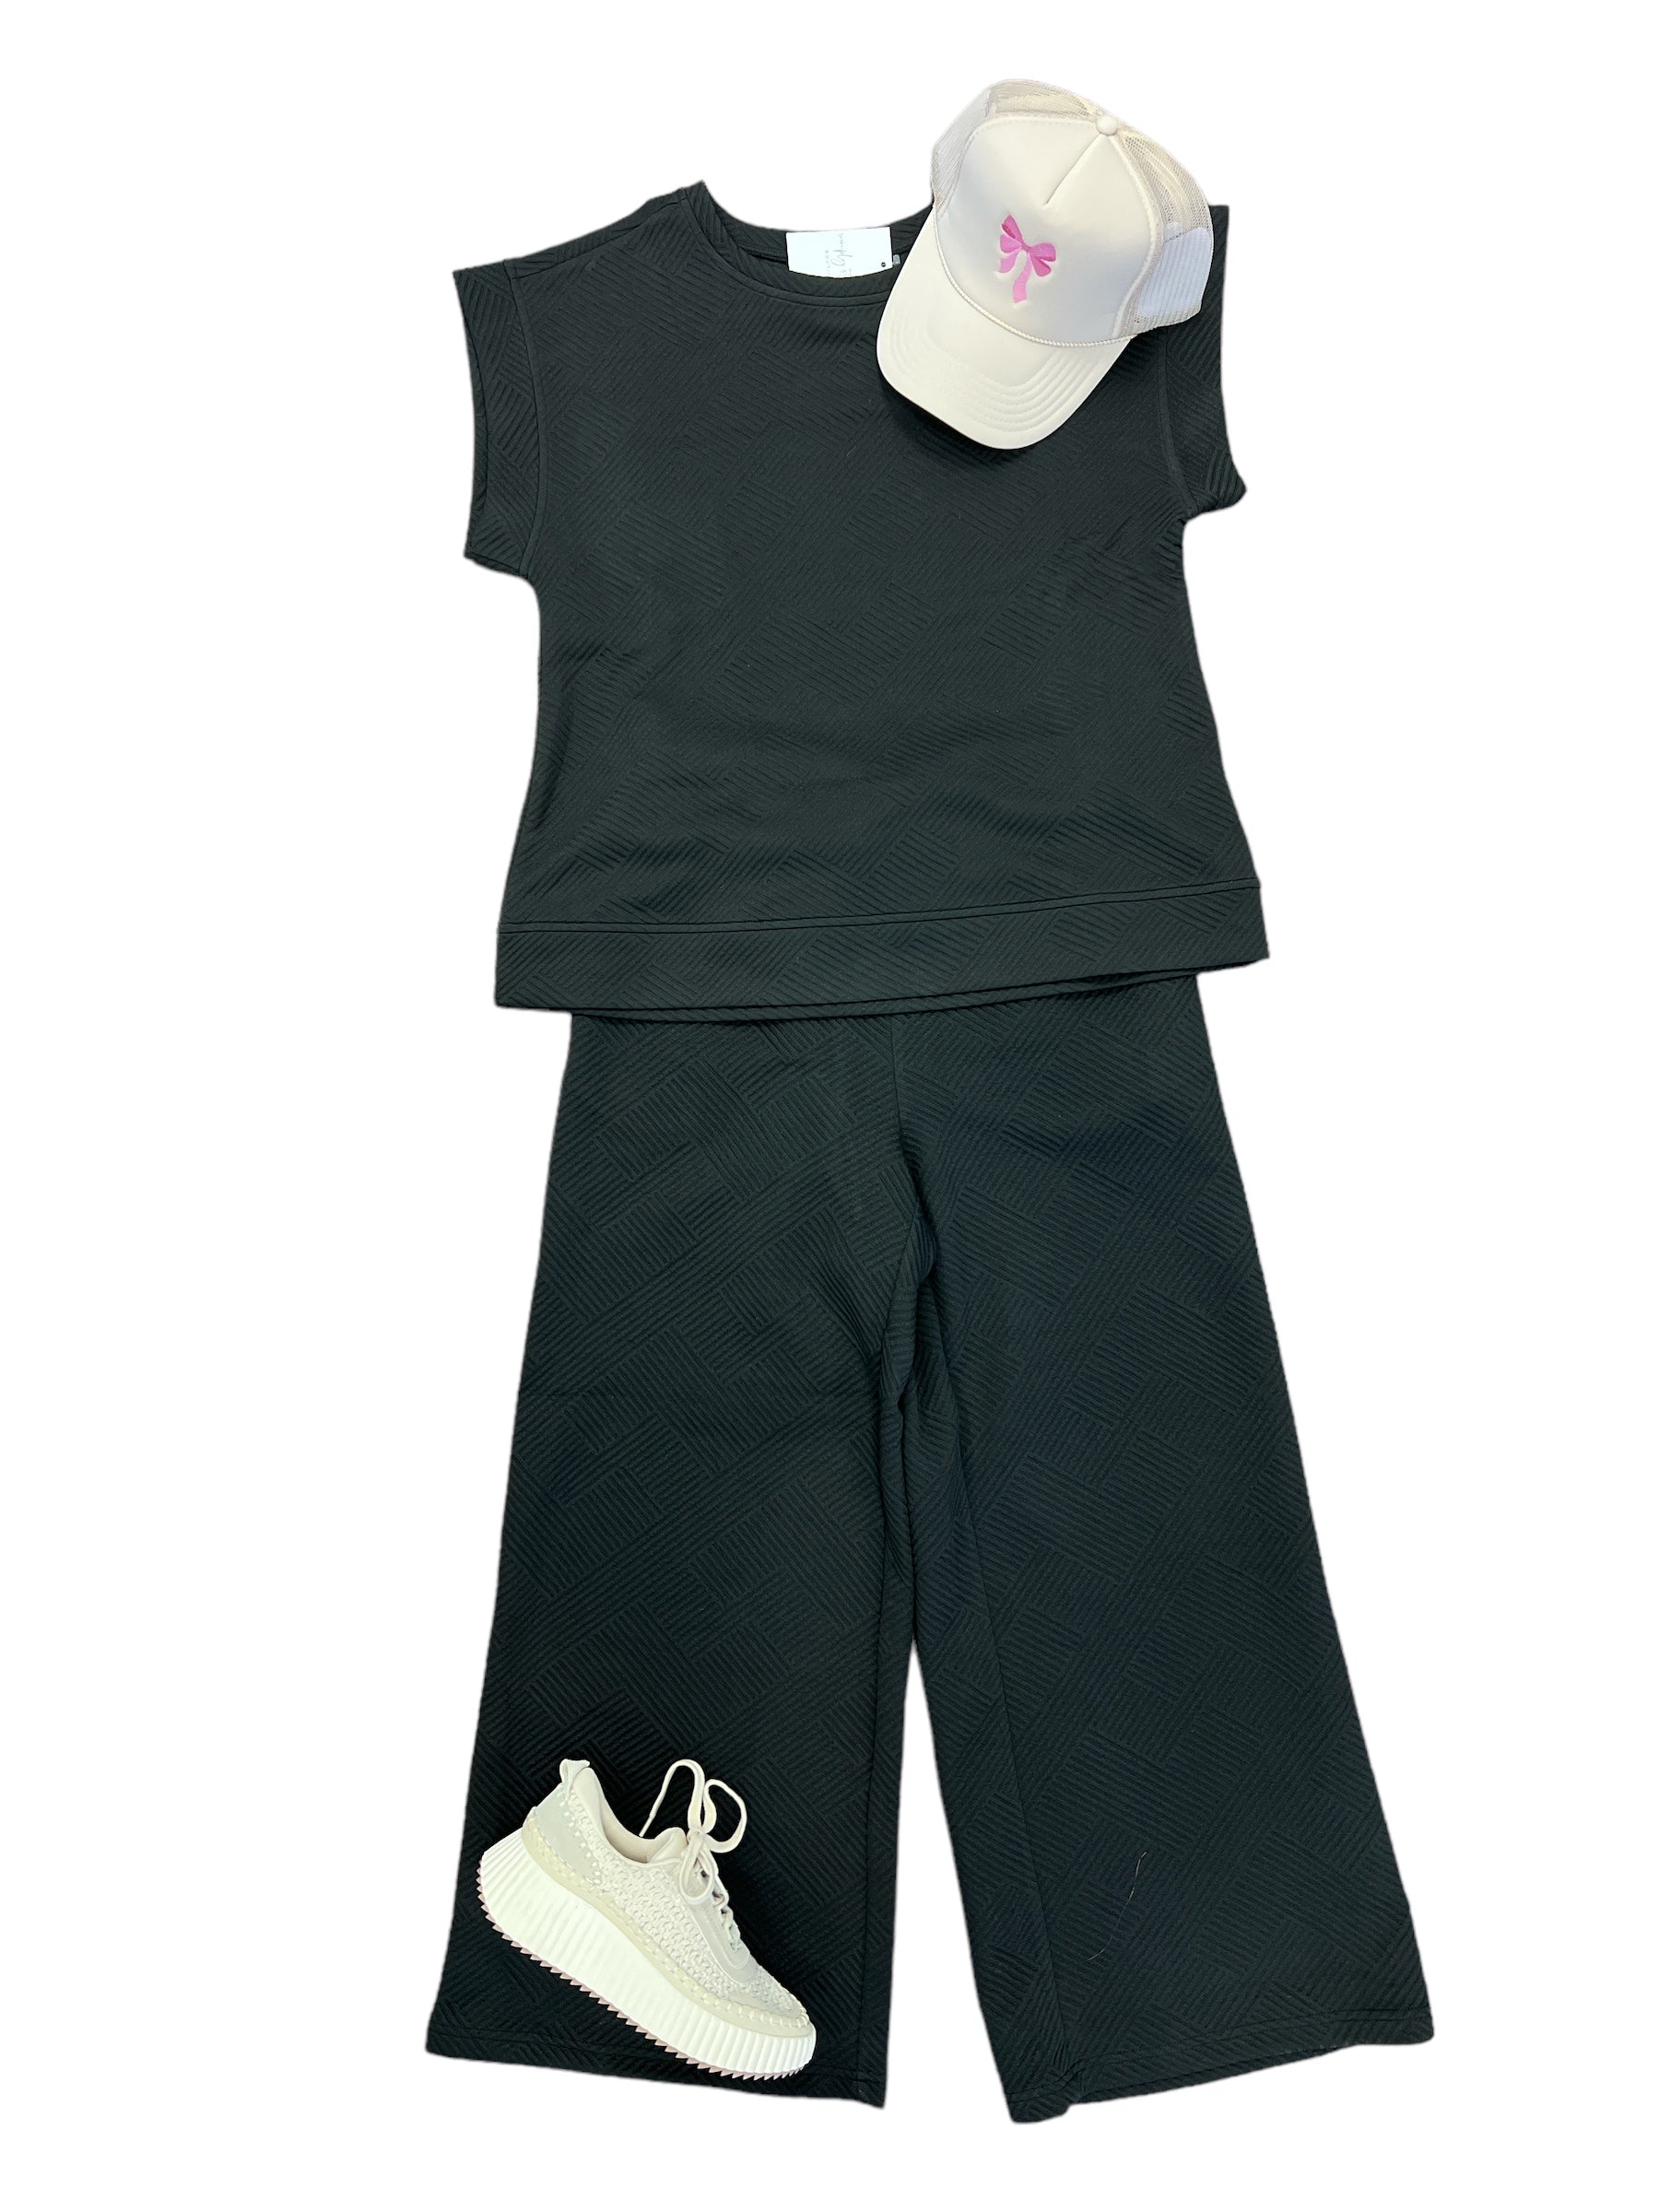 Candace Set-320 Jumpers/Rompers-Simply Stylish Boutique-Simply Stylish Boutique | Women’s & Kid’s Fashion | Paducah, KY